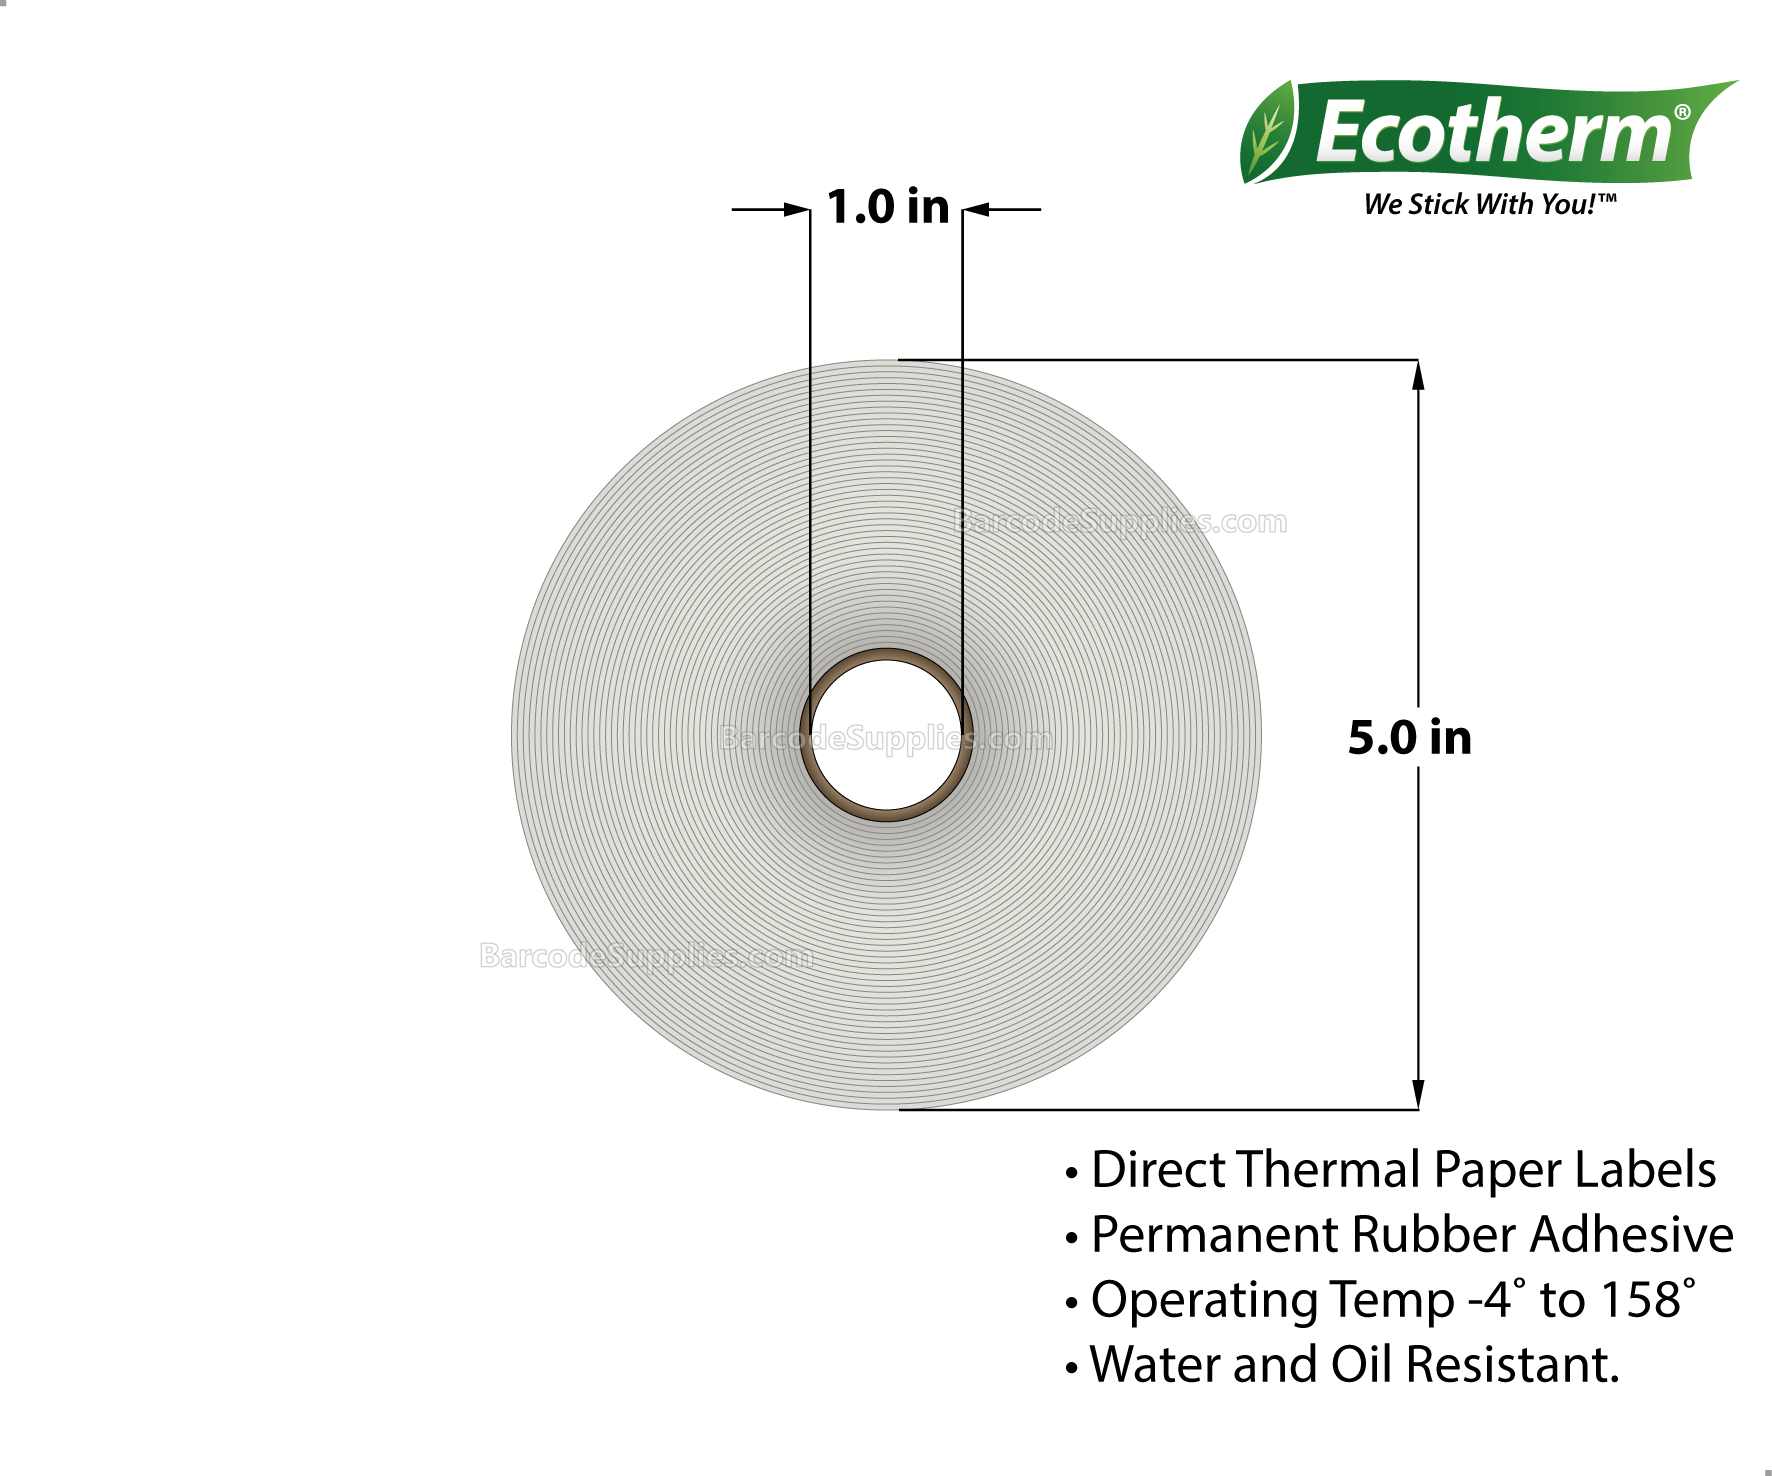 2 x 1.5 Direct Thermal White Labels With Rubber Adhesive - Perforated - 1370 Labels Per Roll - Carton Of 6 Rolls - 8220 Labels Total - MPN: ECOTHERM15120-6